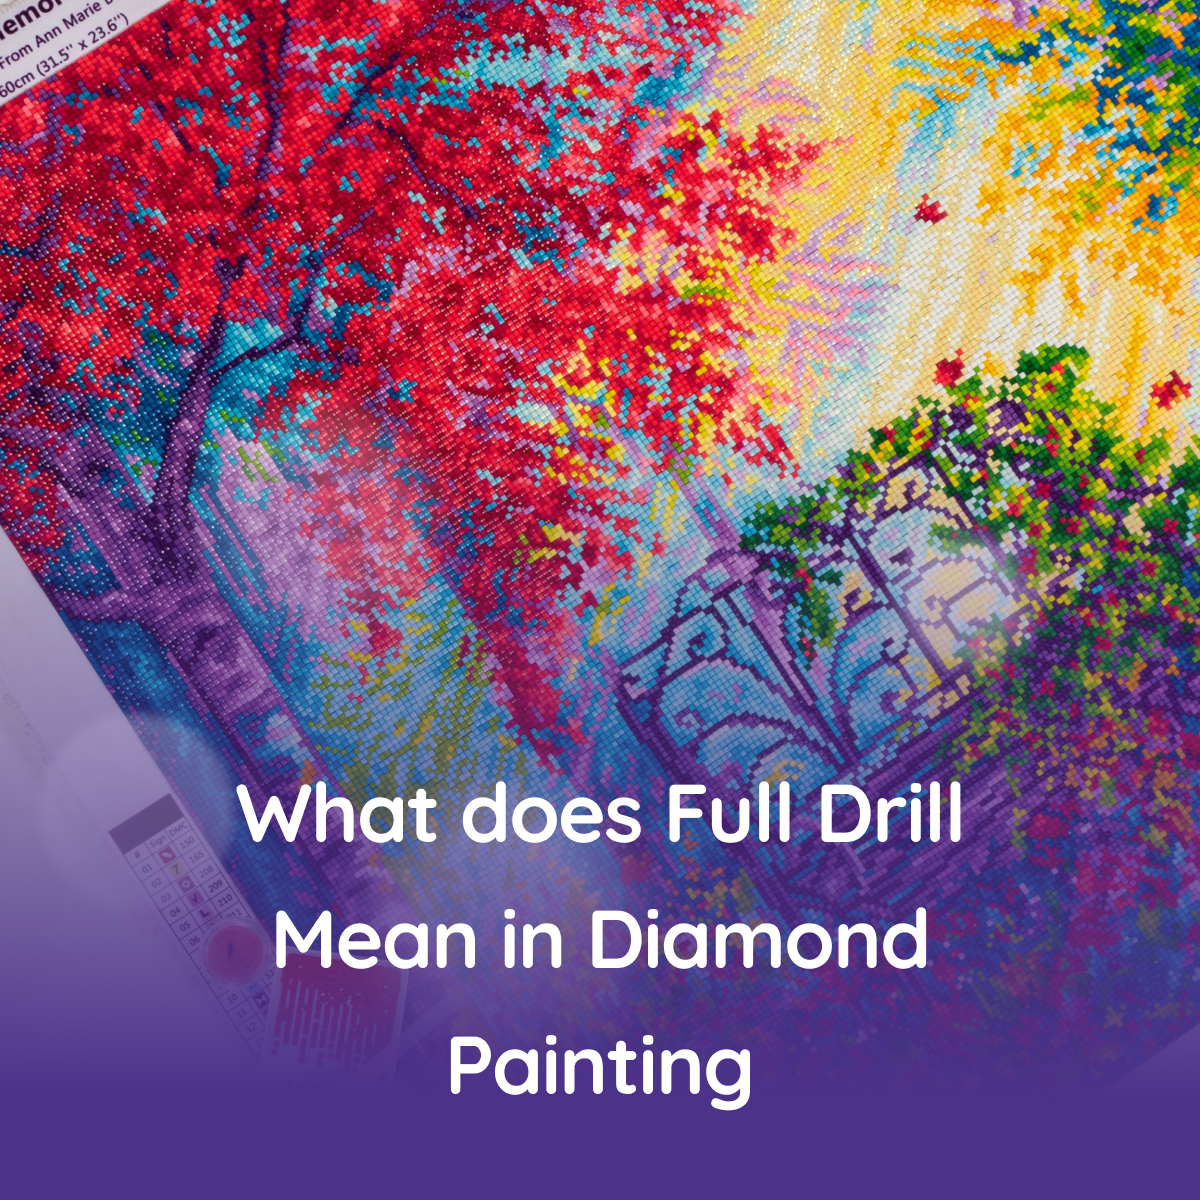 Trying to find diamond paintings with square drills. : r